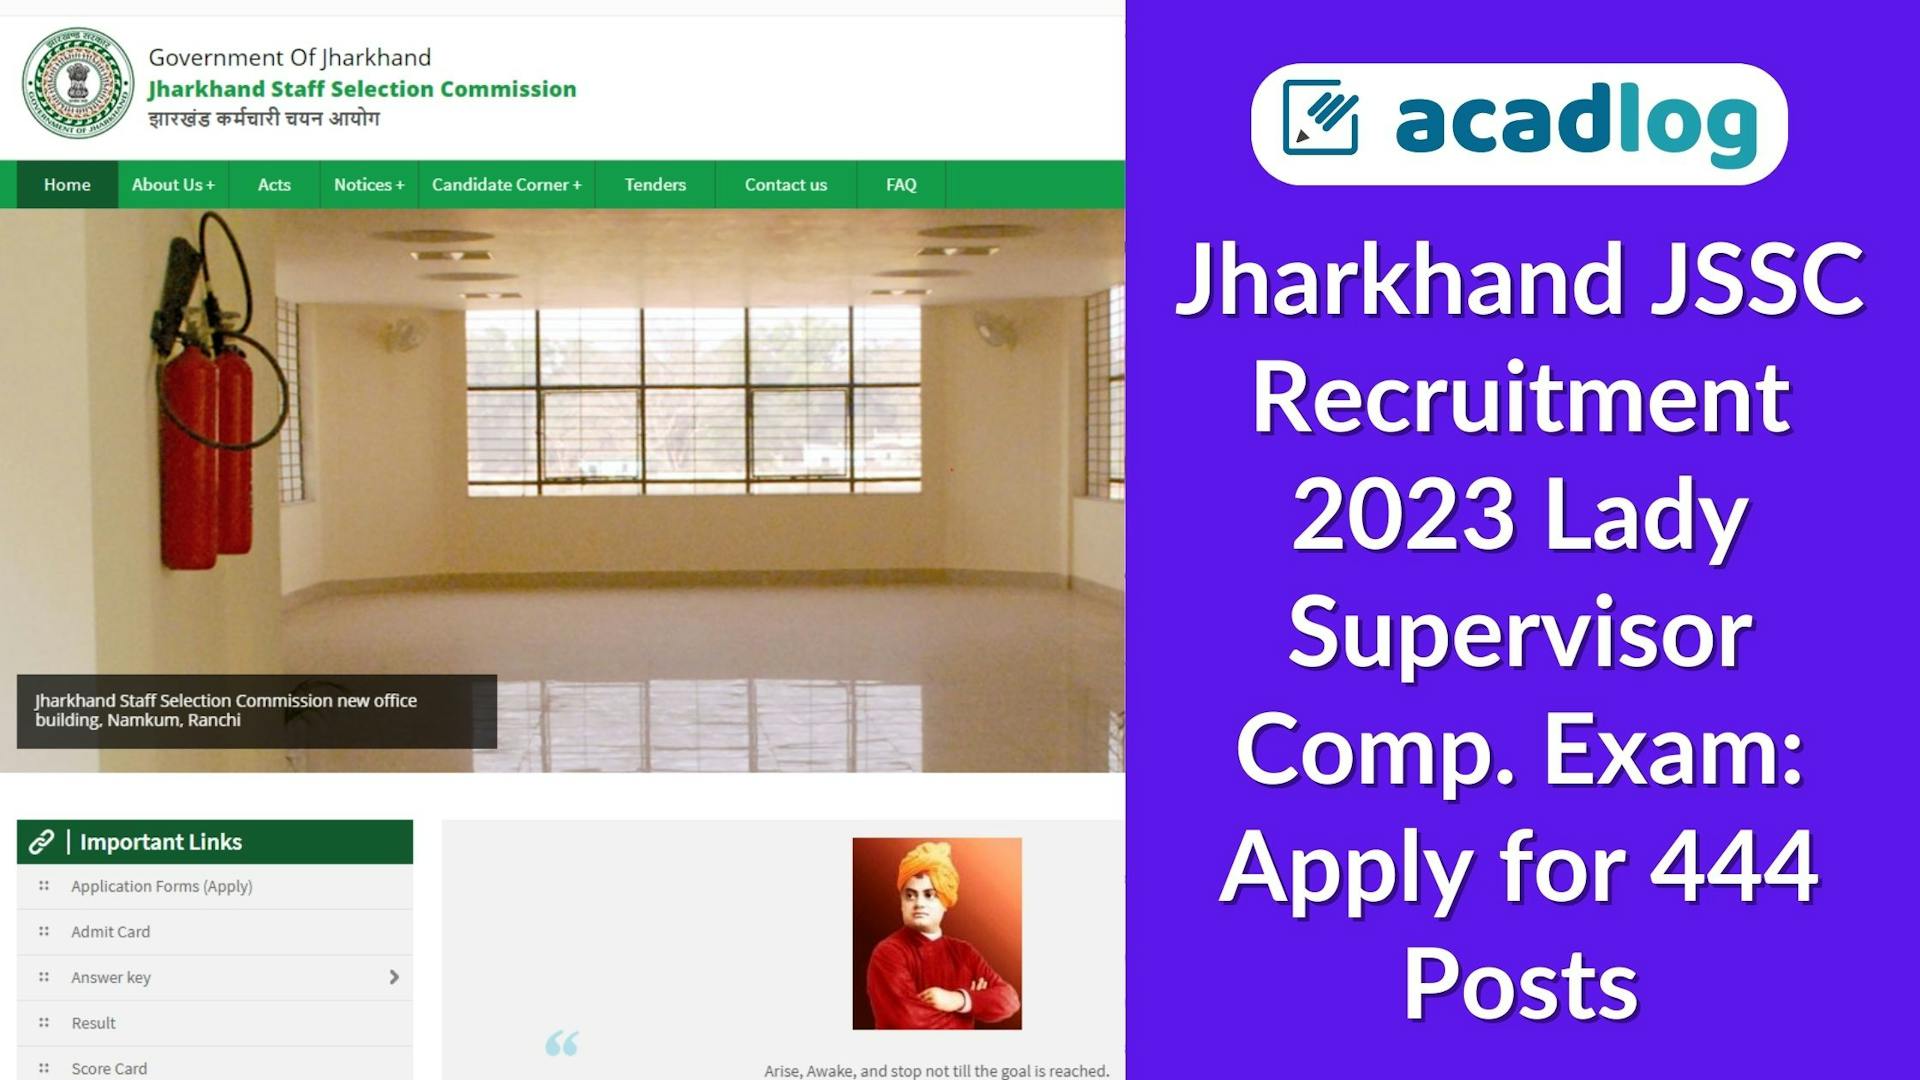 Acadlog: Jharkhand JSSC Lady Supervisor Combined Competitive Exam - JLSCE 2023 Apply Online for 444 Post